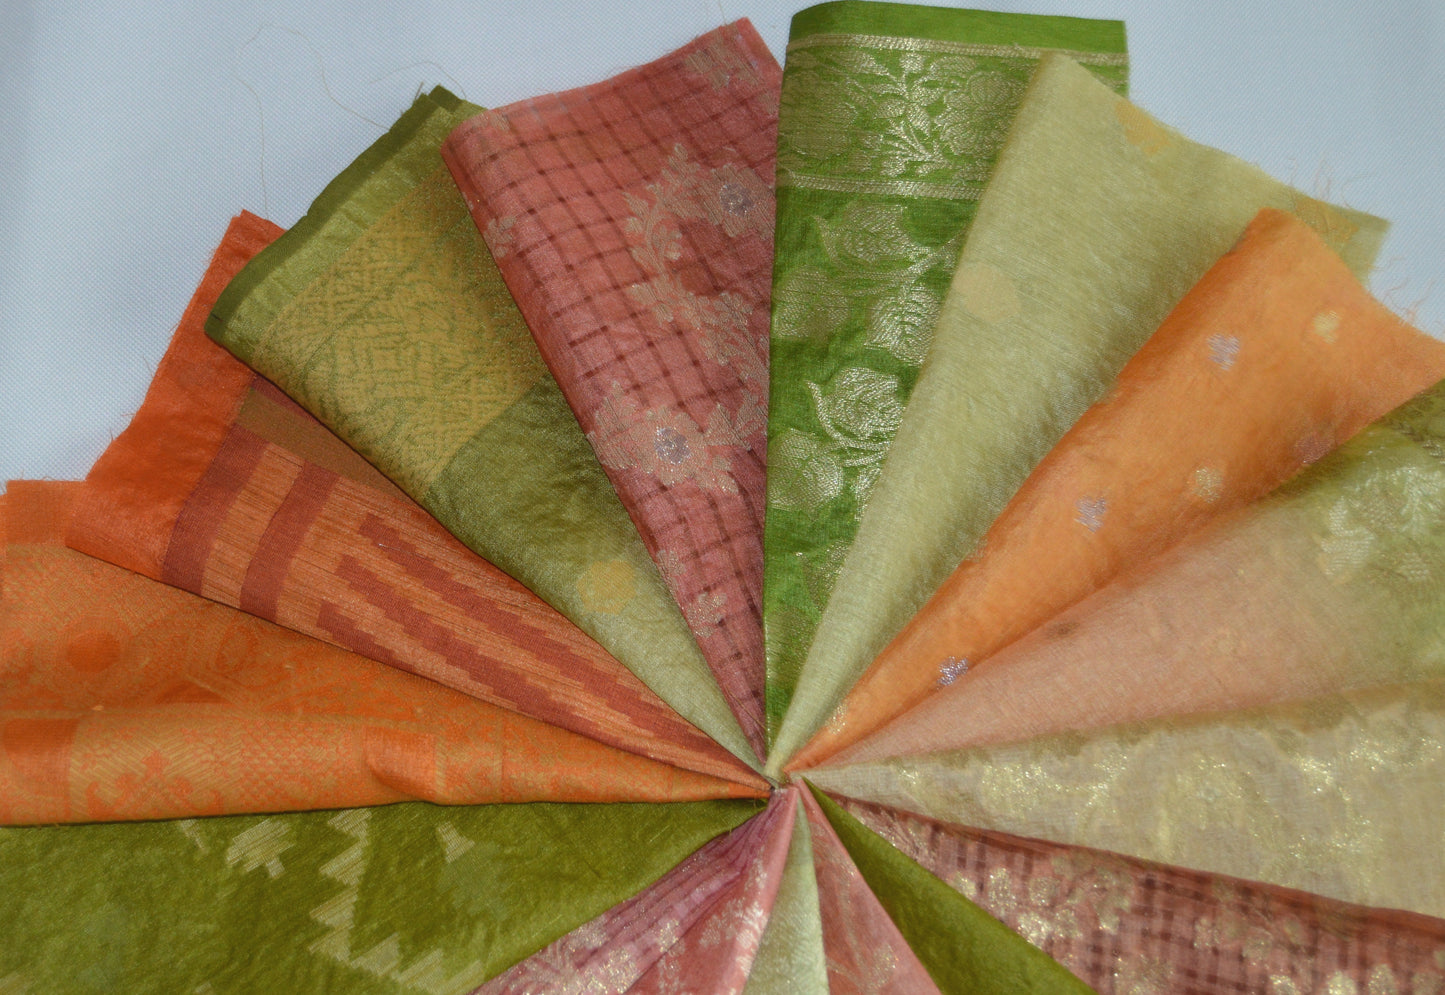 8 Inch x 16 Pieces Orange Green Recycled Vintage Sari Scraps Craft Fabric Card Making Collage Mixed Media Textile Art Sewing Junk Journals